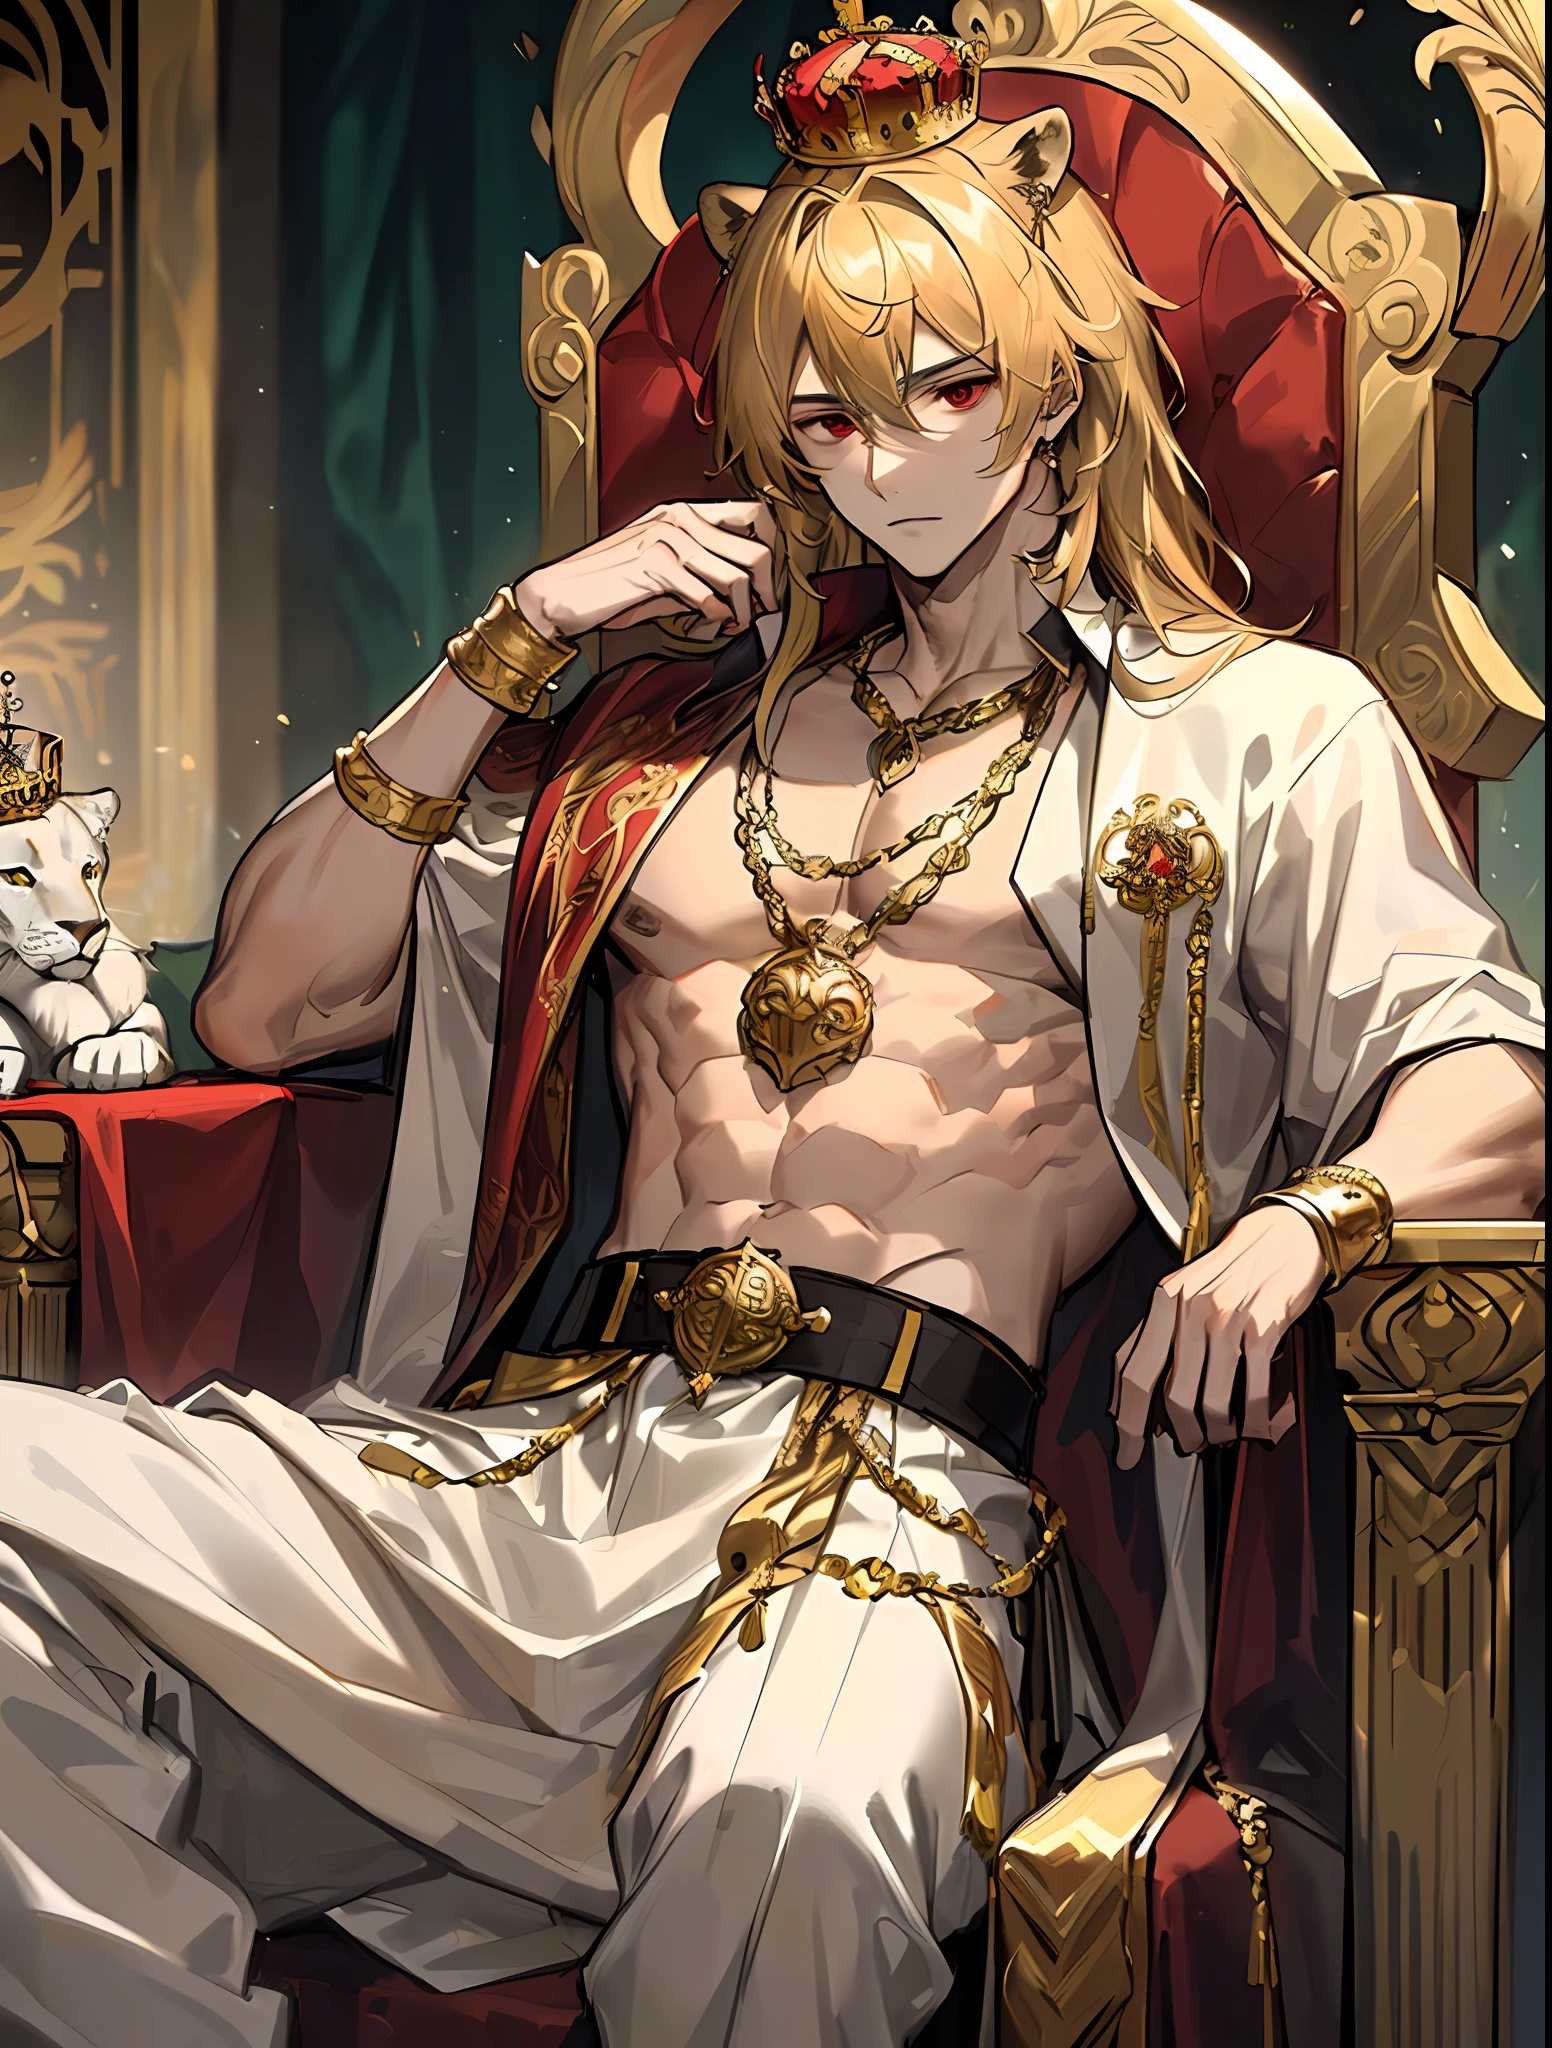 Young man with a crown on his head, kingly air, sitting on a throne with a lion lying at his feet, ornate ornaments, chest muscles, red eyes, blond hair